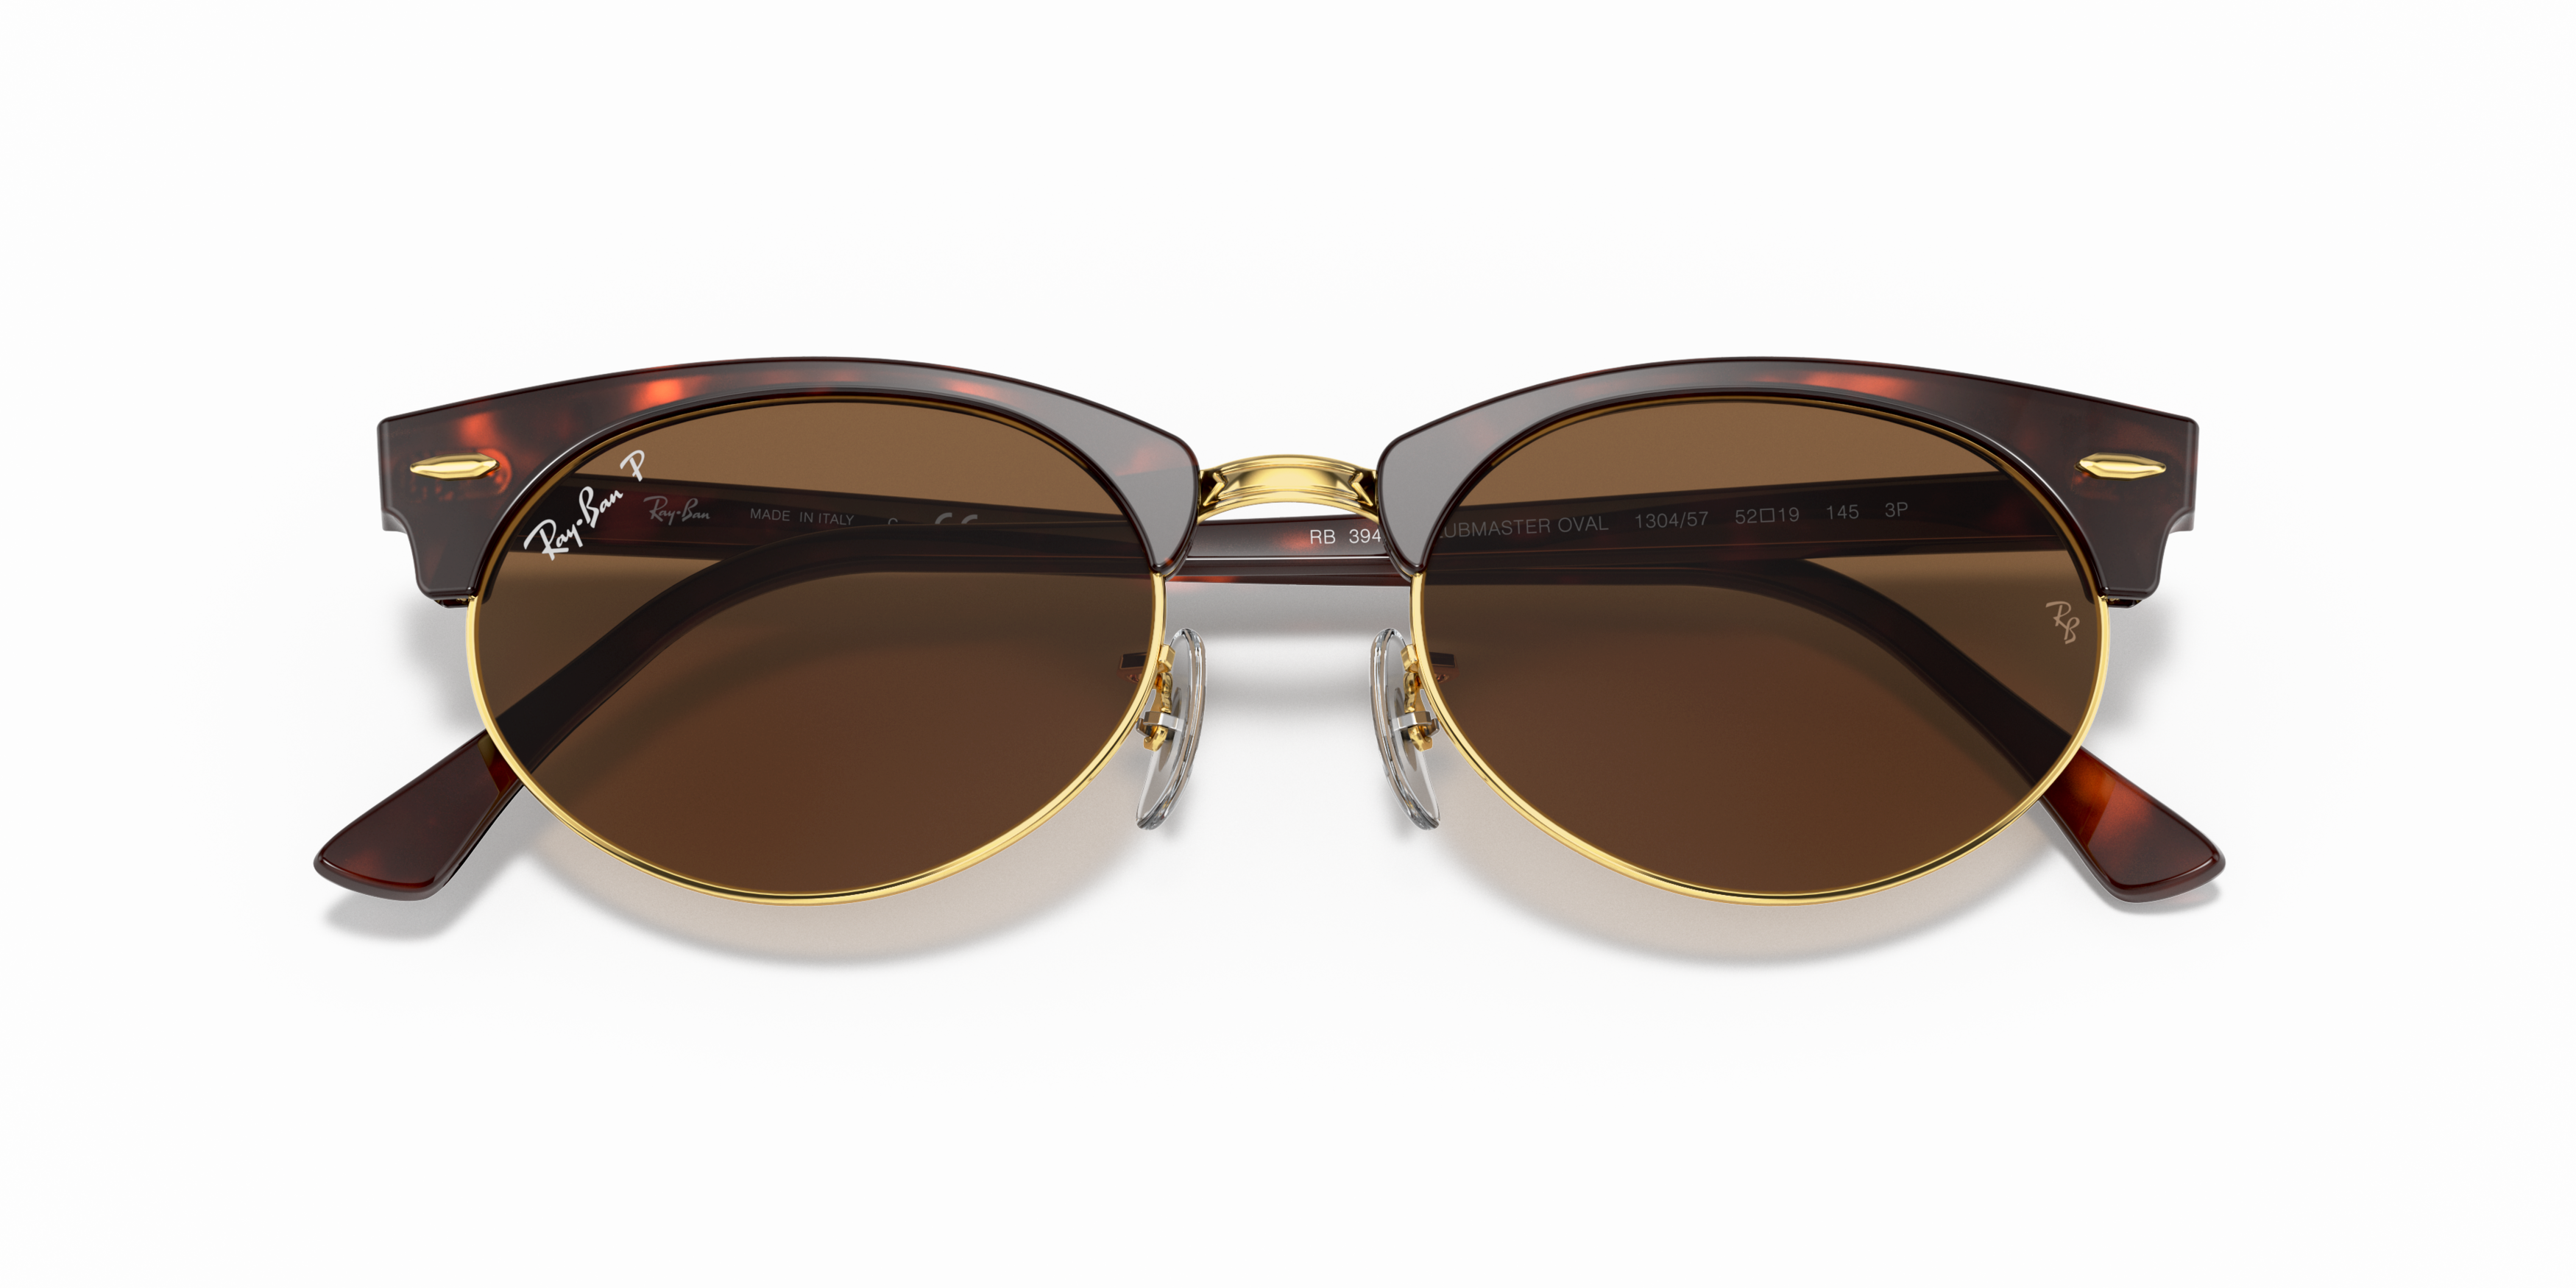 [products.image.folded] Ray-Ban Clubmaster Oval RB3946 130457